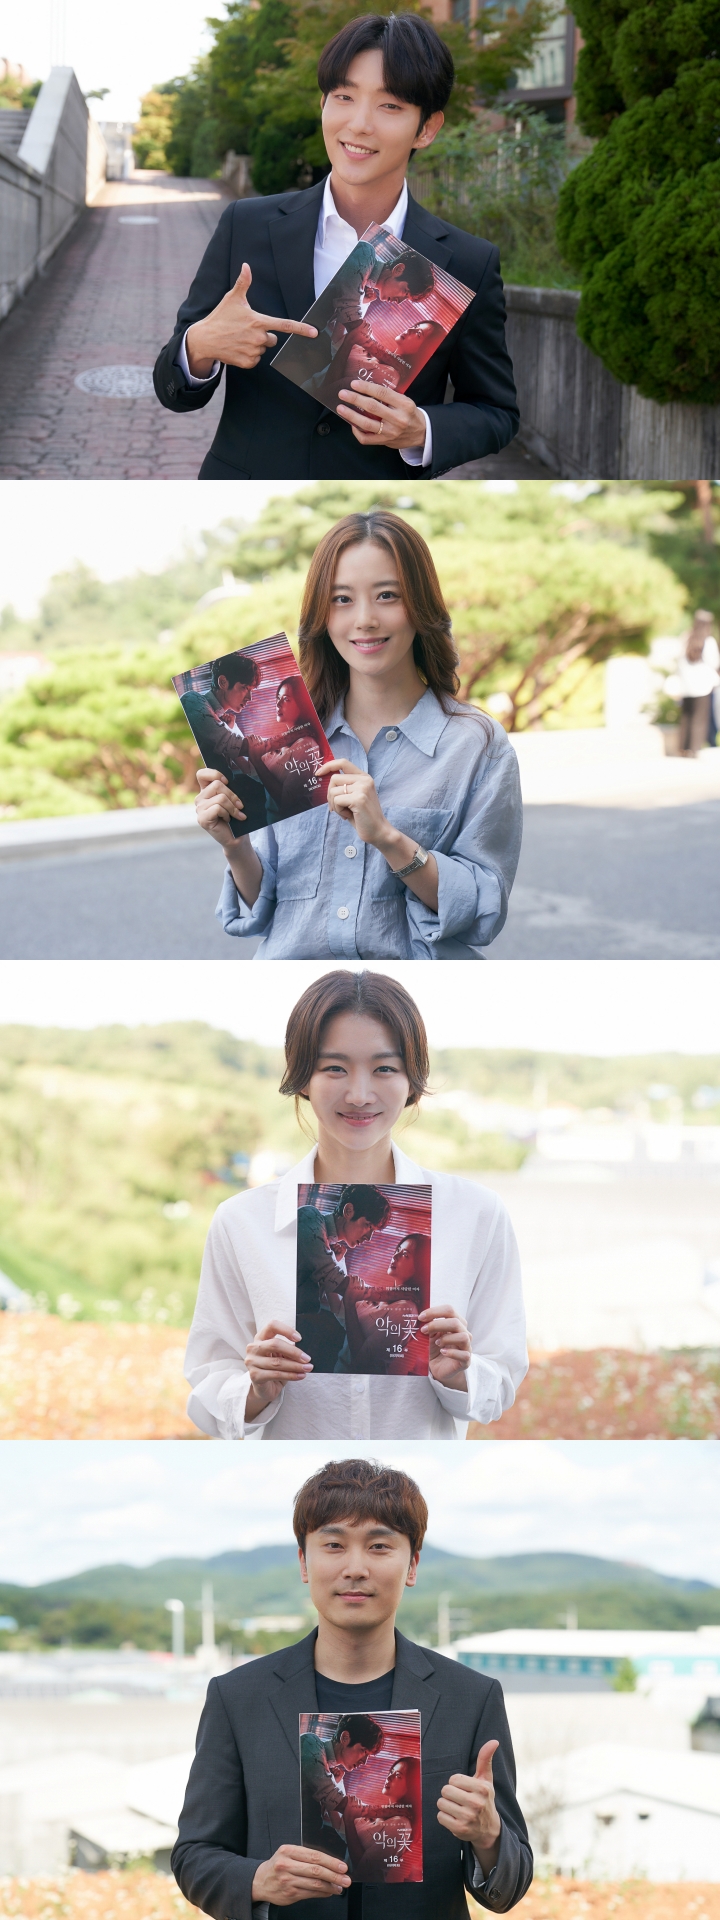 Lee Joon-gi, Moon Chae-won, Jang Hee-jin and Seo Hyeon-woo expressed their feelings ahead of the end of tvN Wednesday-Thursday evening drama Flower of Evil.TVN Wednesday-Thursday evening drama Flower of Evil (director Kim Cheol-gyu, playwright Yoo Jung-hee, production studio Dragon, monster union) In the last broadcast, Do Hae-soo (Jang Hee-jin), who was in danger of death with two shots toward Do Hyun-soo (Lee Joon-gi) and Baek Hee-sung (Kim Ji-hoon) He made the ending as he rose.Do Hae-su and Seo Hyeon-woo, as well as Do Hyun-soos melodrama of Moon Chae-won, are also experiencing explosive questions at the last meeting about what direction they will flow.With the attention of hot viewers more than ever, the protagonists of the Flower of Evil, which is performing a high-level performance in the drama, presented a special message to repay the love.Lee Joon-gi of Do Hyun-soo, who proved the class of Myeongbul-jeon, said, All The Flower of Evil  that have been running for the past seven months have been completed.In fact, when I first started, it felt difficult and I felt a lot of pressure to do well.I think it was able to finish well thanks to the bishop, the writer, the staff and the fellow actors who have been together. I am really grateful to you for your support and support for the flower of evil, he said.Although every work has doneThe Flower of Evil  seems to have a long toxicity.I would like to express my sincere gratitude and love to the Flower of Evil and all those who loved Do Hyun-soo. Moon Chae-won, who wrote another life character as a carpenter, said, I do not yet realize that the flower of evil, which spent three seasons together from warm spring to cool autumn, is about to end.I think it will be remembered by me as a work that is more rewarding than ever since I did my best to shoot.I sincerely thank the viewers who loved the drama, and there were moments when it was difficult and difficult, as I wanted to express the car support character and feelings as true as possible.But thanks to the love that viewers sent me, I was able to overcome it well.It was a really happy time to meet all the staff including Kim Chul-gyu, Yoo Jung-hee, and fellow actors with good works.I would like to ask for your interest and expectation for the flower of evil until the end. I did not forget the sense of encouraging the shooter.Jang Hee-jin of Dohaesu Station, who had a stronger heart than anyone in a thin atmosphere, said, It was a happy time to receive an unexpected big love.I would like to express my sincere gratitude to all the people who made it together and the viewers who have been begging.I hope you will join me until the end of the final episode of The Flower of Evil will be broadcast tonight. Seo Hyeon-woo, who has proved the genre-unlimited acting spectrum in the role of Kim Moo-jin, also said, Thanks to the hot love and interest of the viewers, I think I was able to finish well with my staff and safety.I hope that the flower of evil will be a sincere comfort to rest for a while in a difficult situation. I thank you. The final page of the high-density emotional tracking drama of the two people facing the truth that they want to ignore, including Baek Hee-sung (Do Hyun-soo), the man who played even love, and his wife, Cha Ji-won, who started to doubt his reality, can be seen at the last episode of tvN Wednesday-Thursday evening drama Flower of Evil at 10:50 pm on the 23rd.